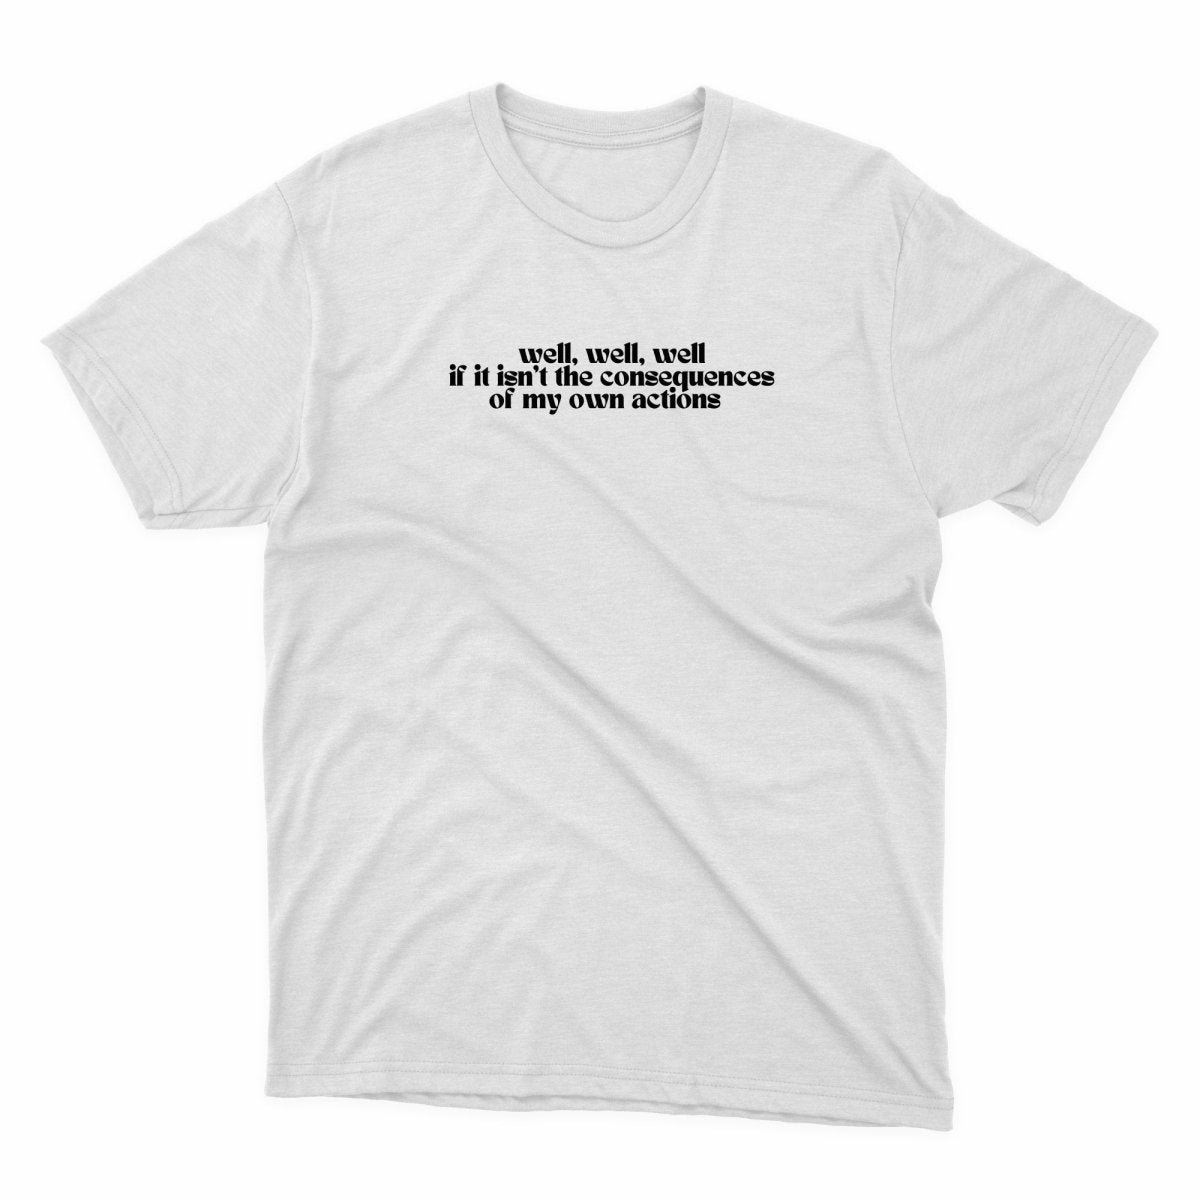 Consequences Of My Own Actions Shirt - stickerbullConsequences Of My Own Actions ShirtShirtsPrintifystickerbull27199001930606089975WhiteSa white t - shirt with a quote on it